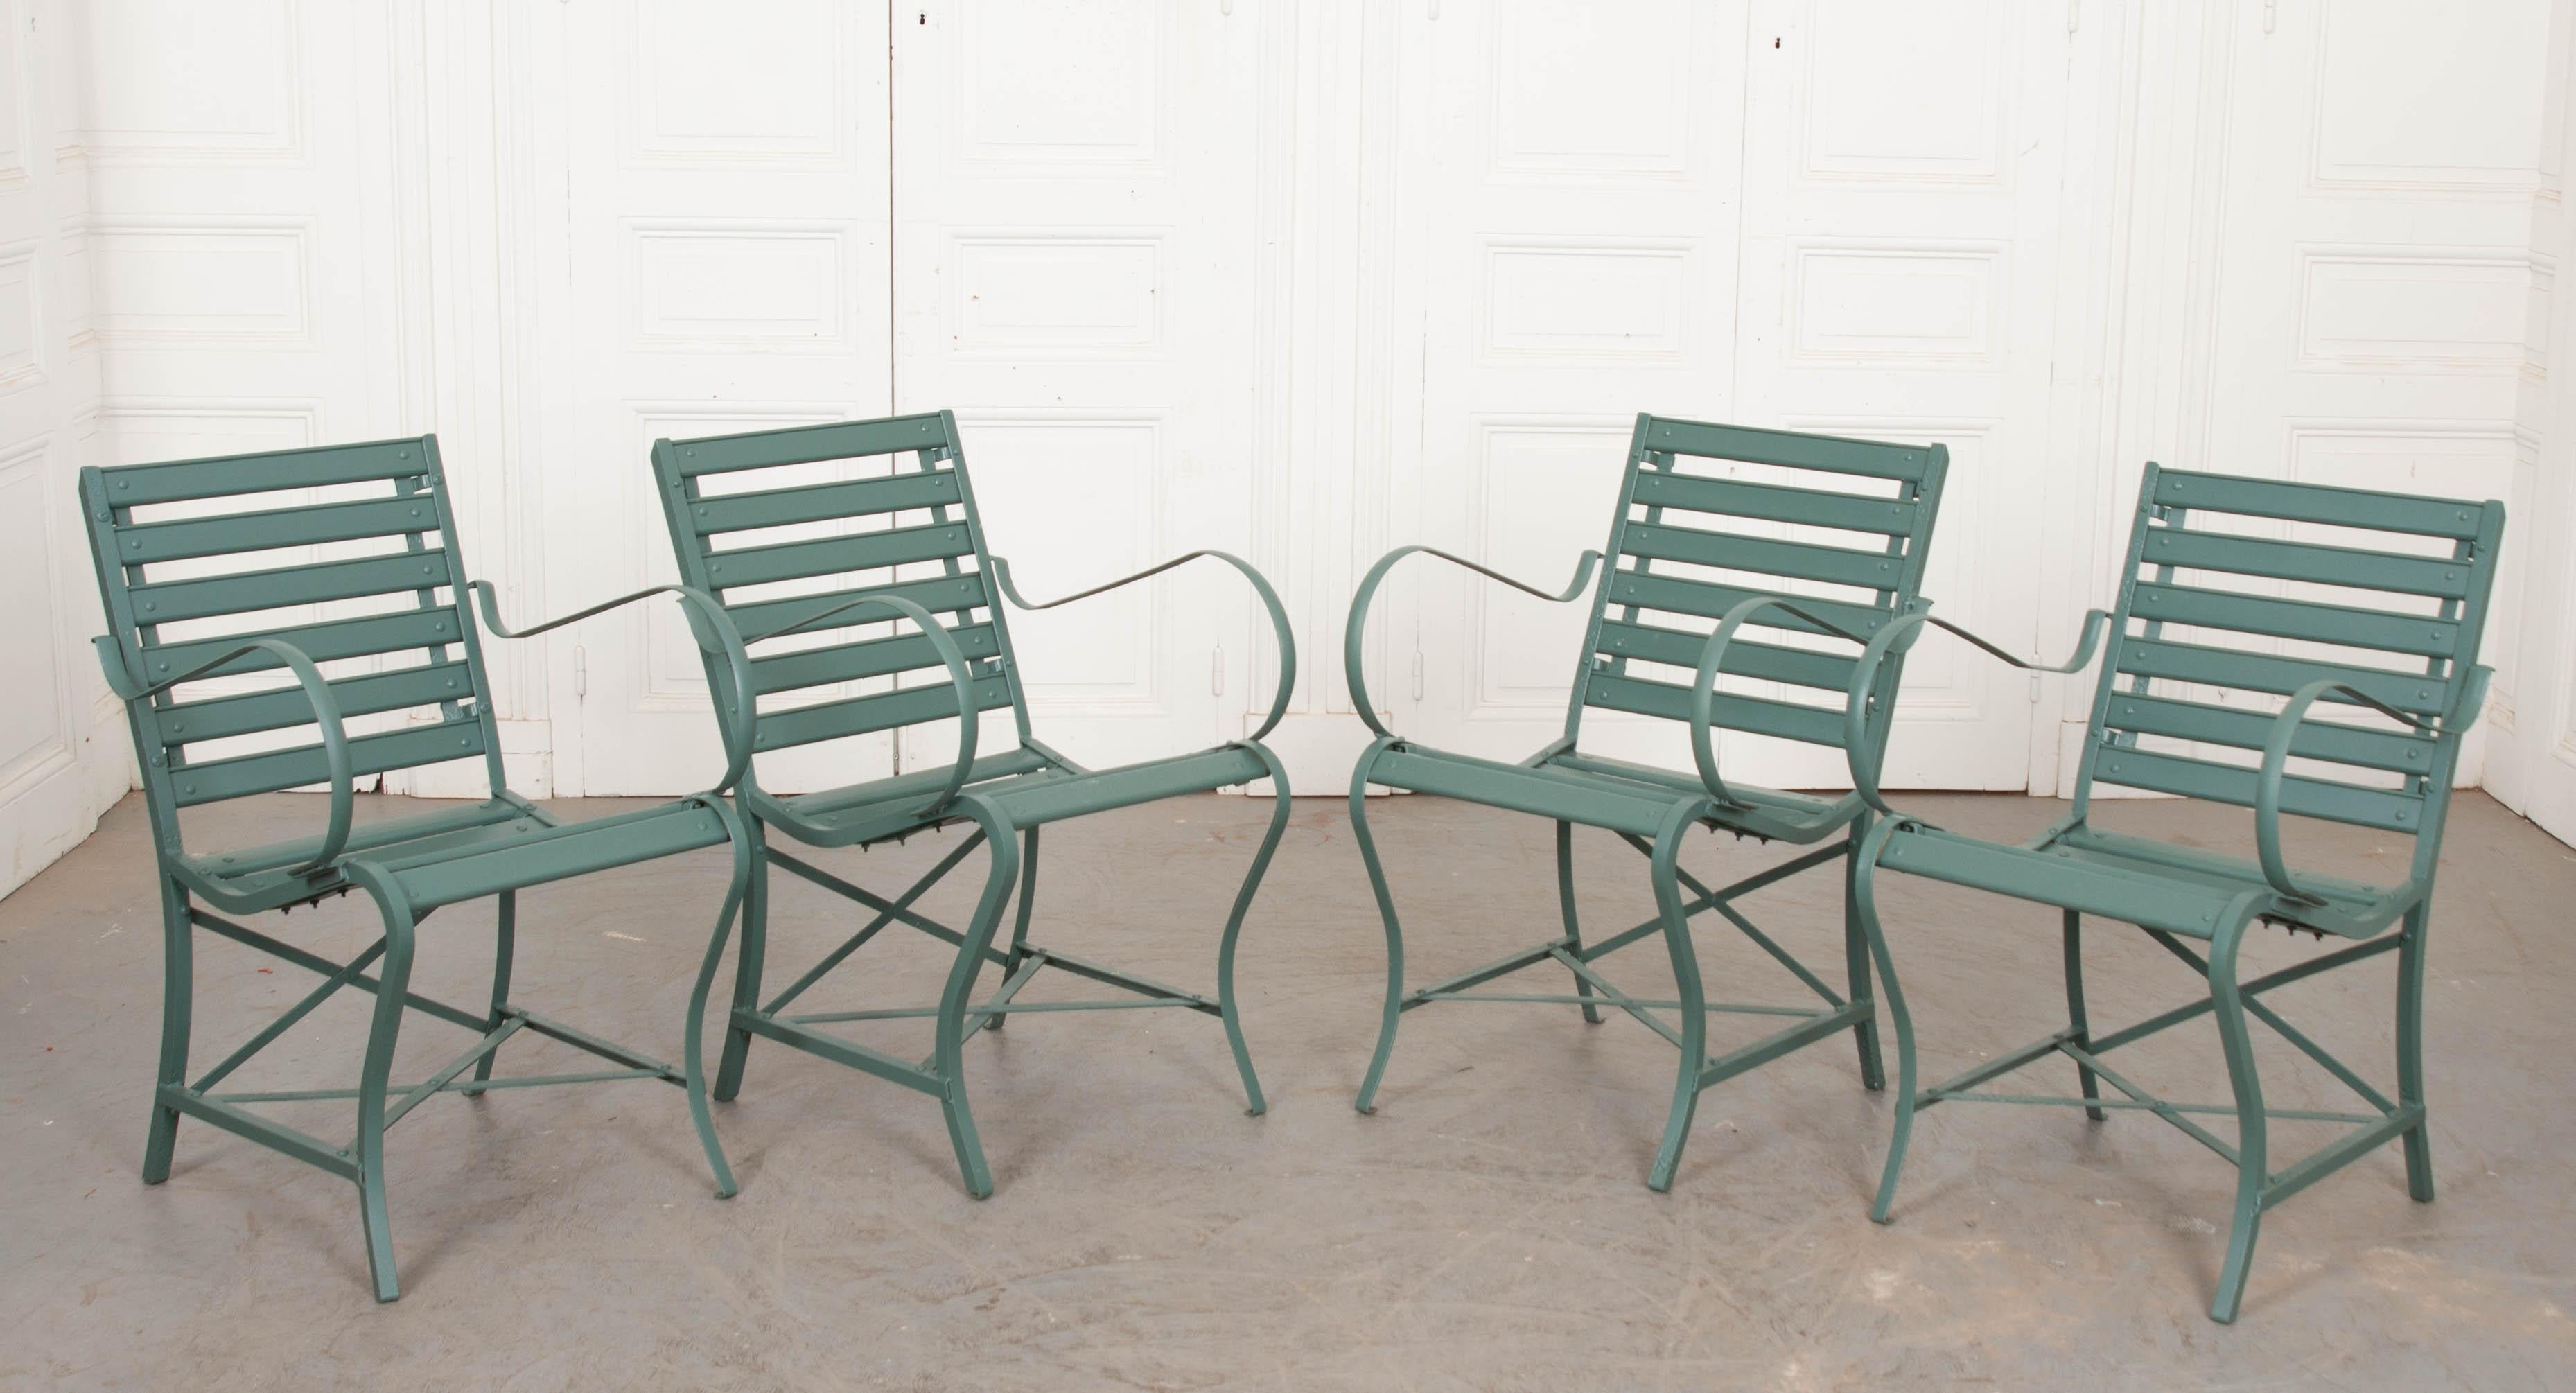 Painted Set of Five French Early 20th Century Metal and Wood Garden Chairs